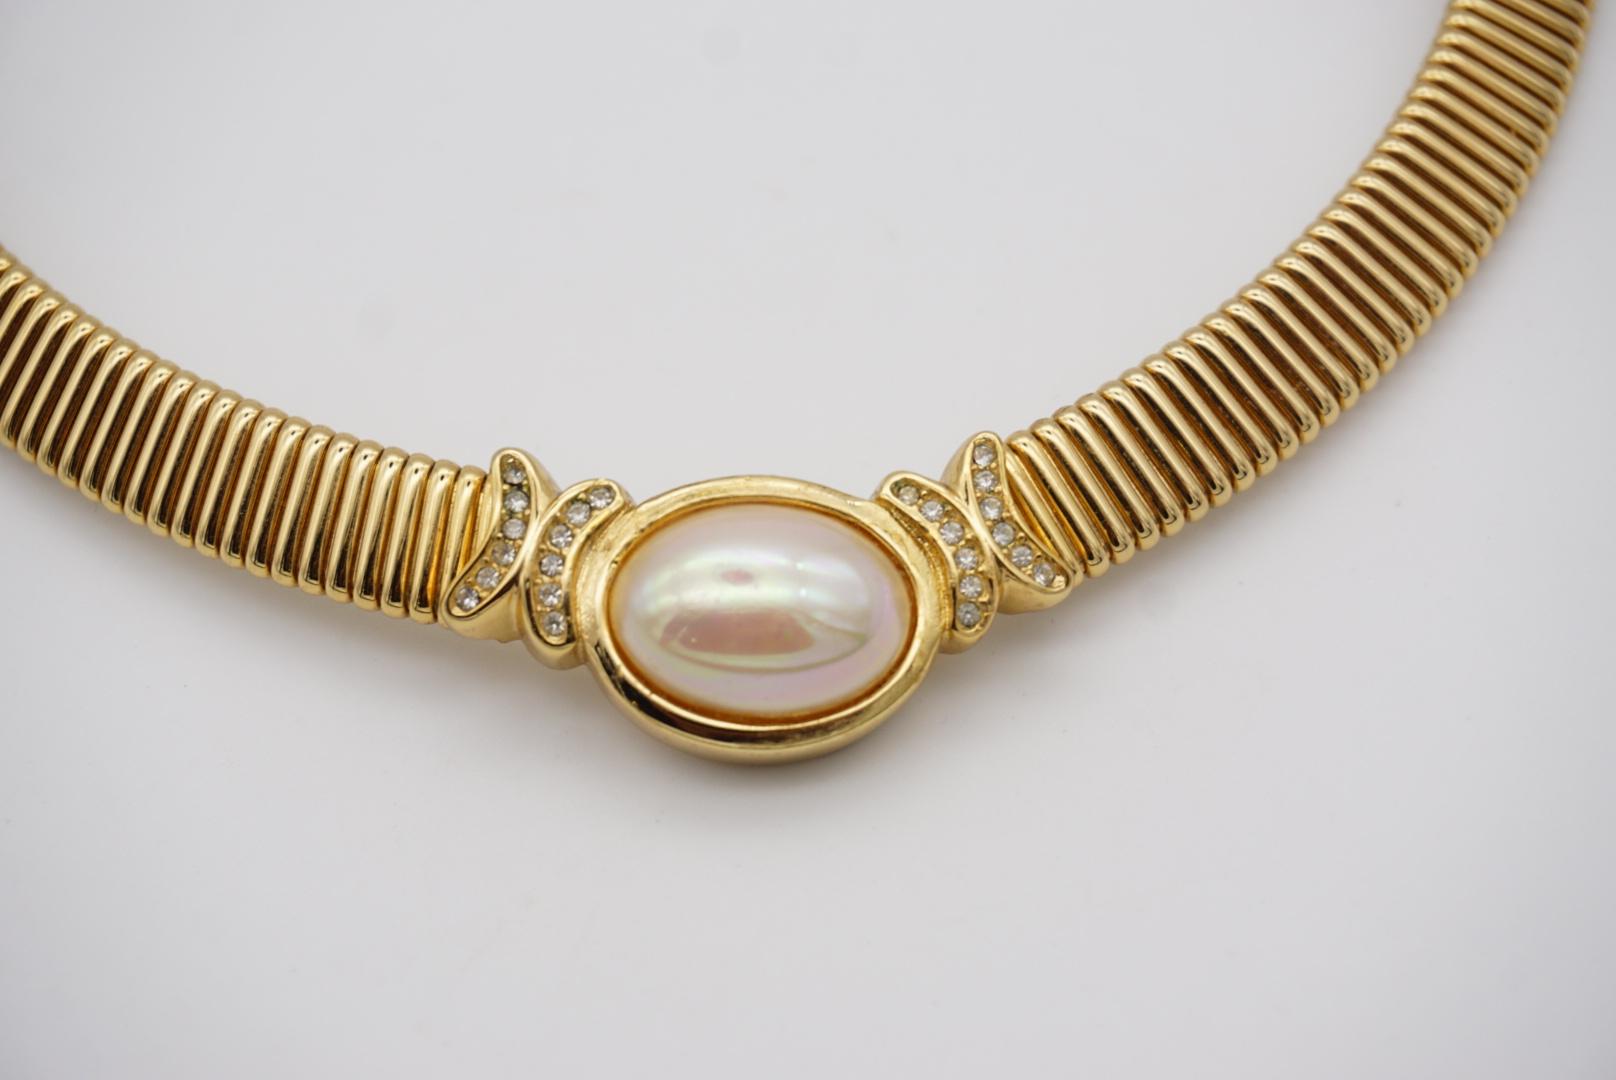 Christian Dior Vintage 1980s Omega Collar Oval Pearl Crystals Gold Necklace In Excellent Condition For Sale In Wokingham, England